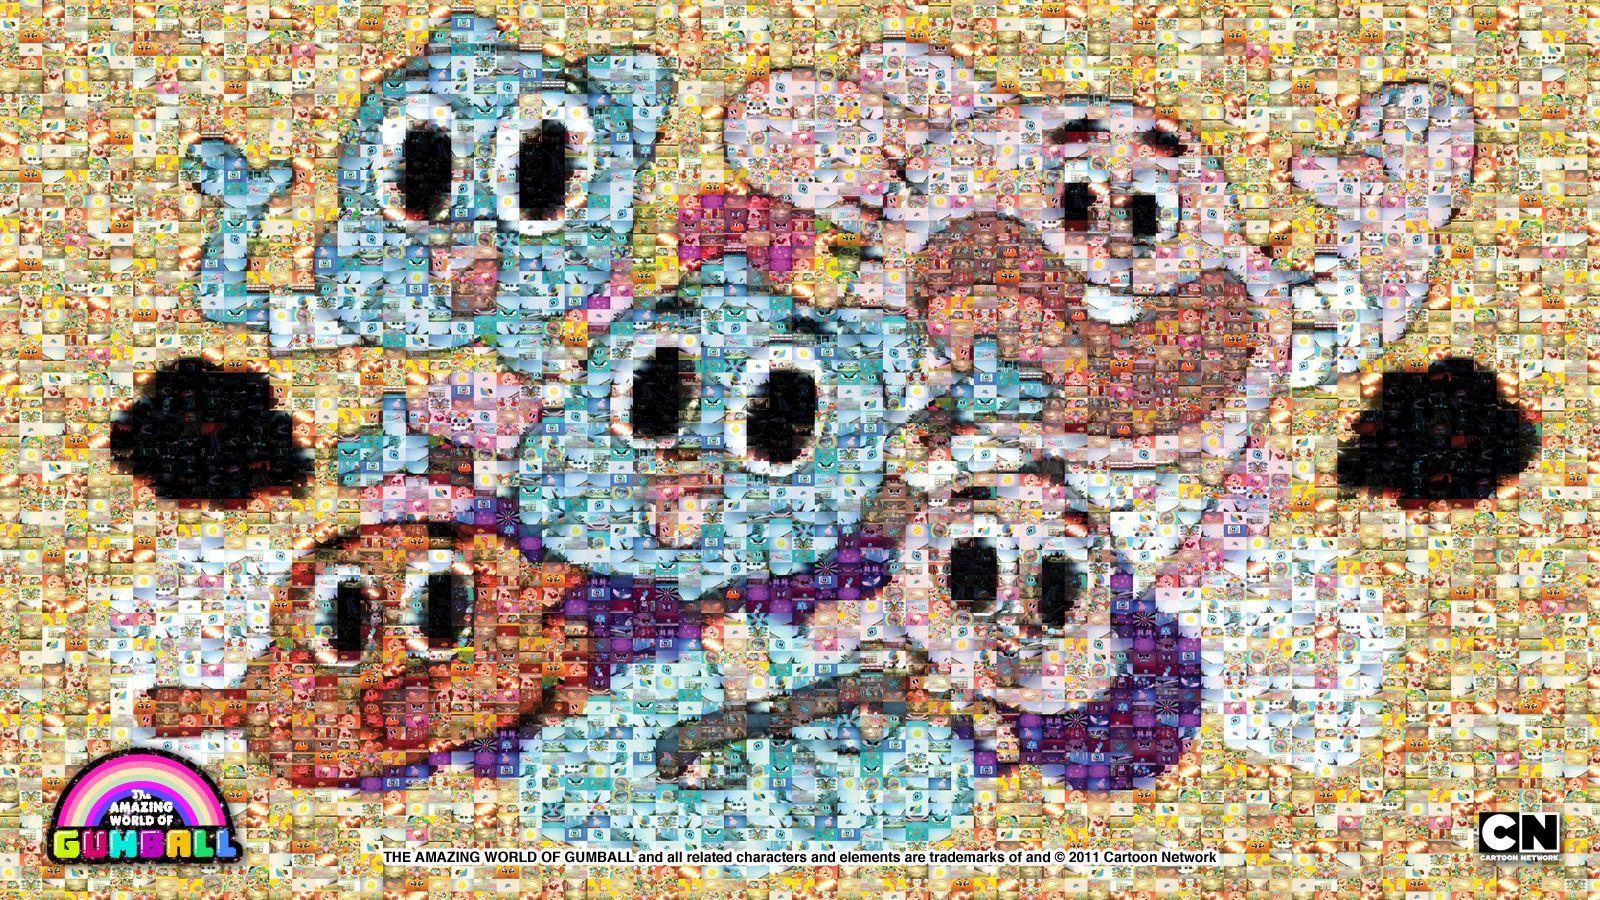 The Amazing World of Gumball image The wattersons HD wallpaper